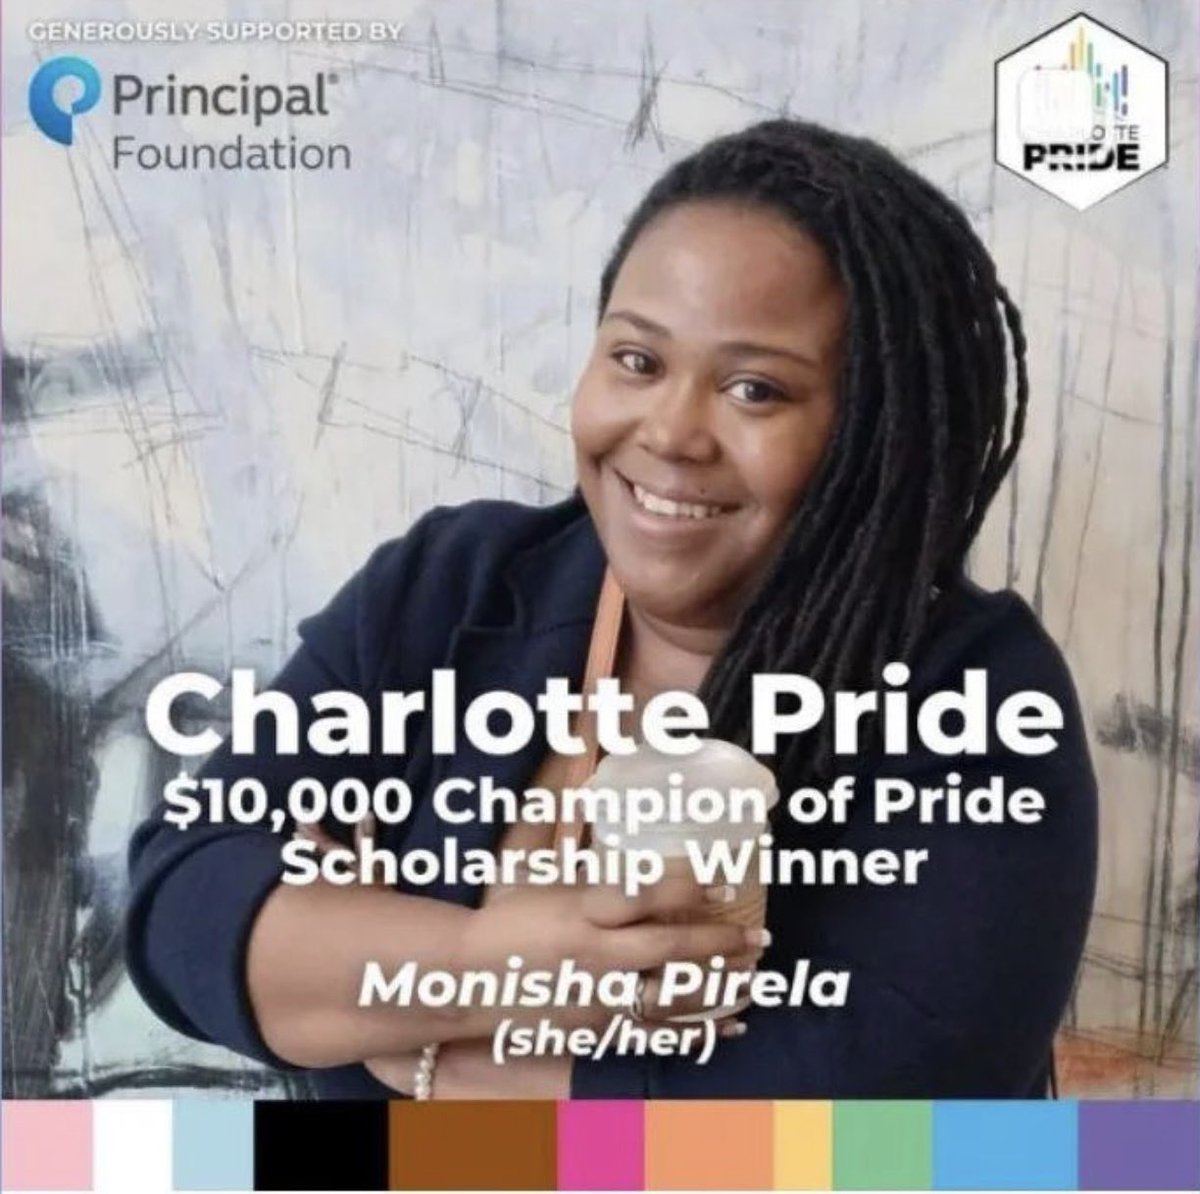 RestoreHER is so very proud of MONISHA PIRELA! Mo is RRR Fellow from our 4th cohort. Mo Is On Fire 🔥🔥🔥 She is a successful entrepreneur solidarityandco.com. Mo is the WINNER of rhe $10,000 Champion of Pride Scholarship with @cltpride CONGRATULATIONS🎉